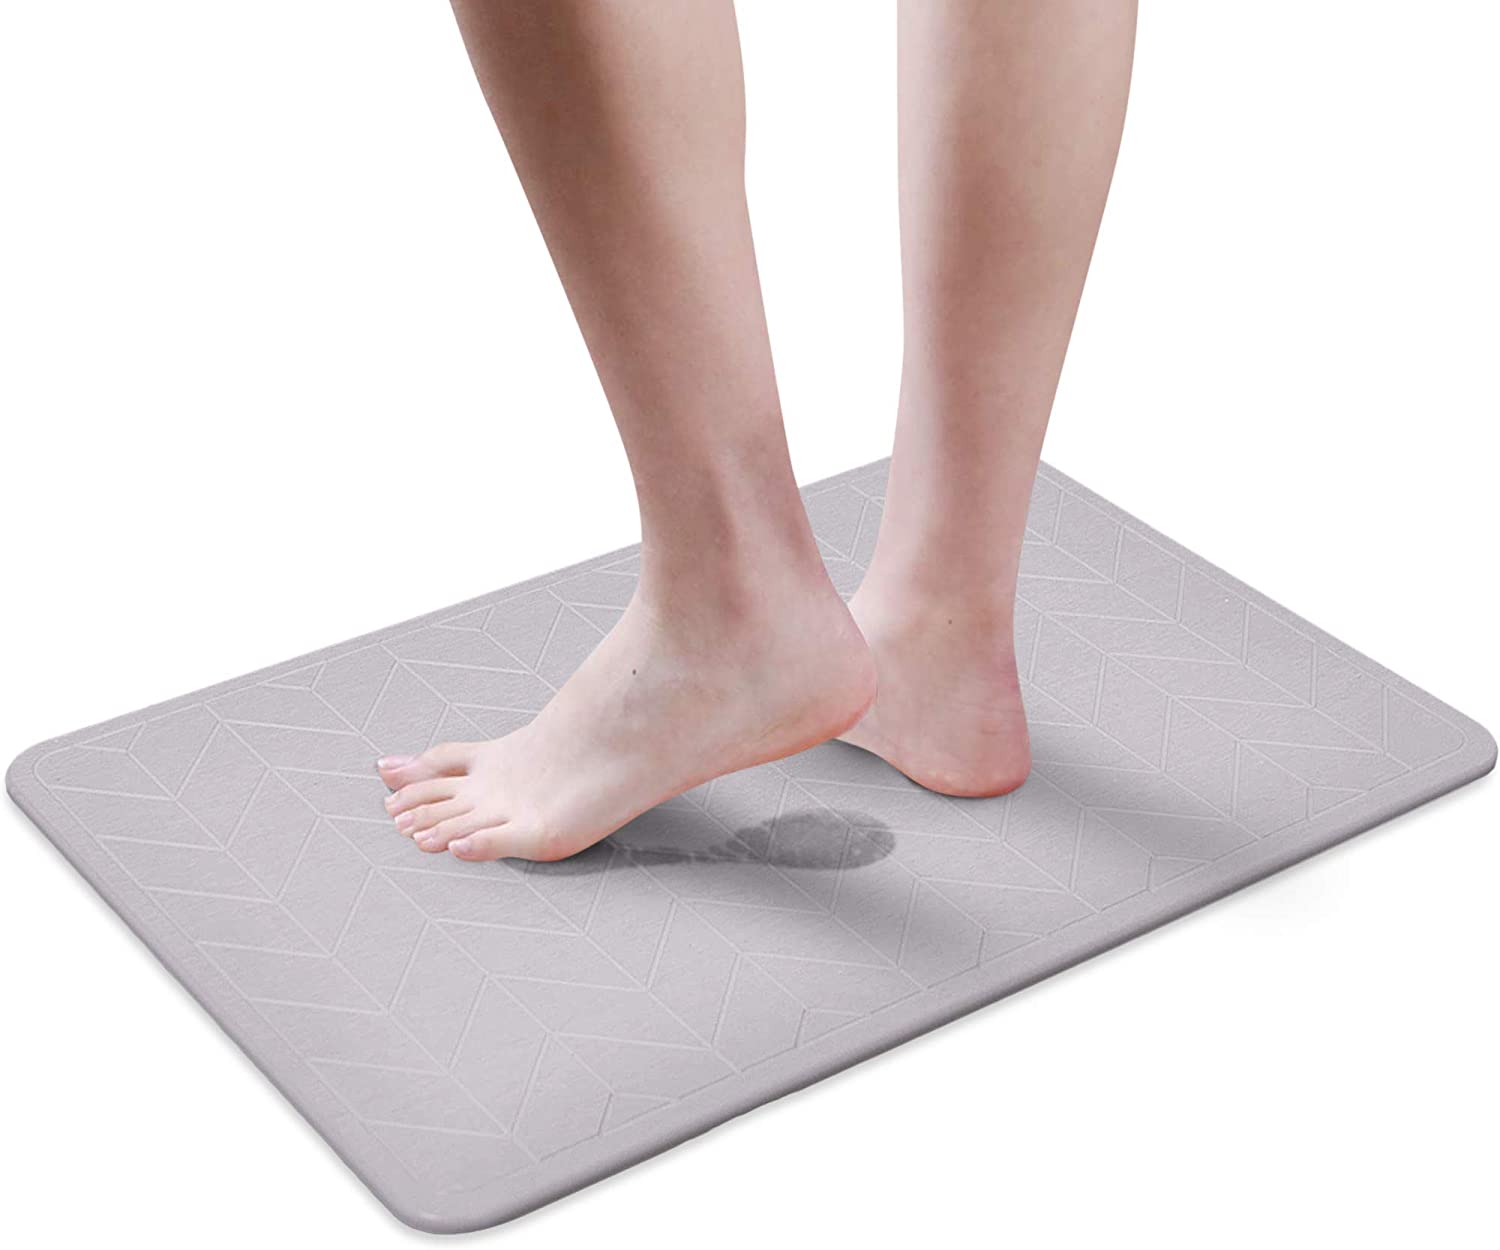 The Best Bath Mats in 2023 - Old House Journal Review